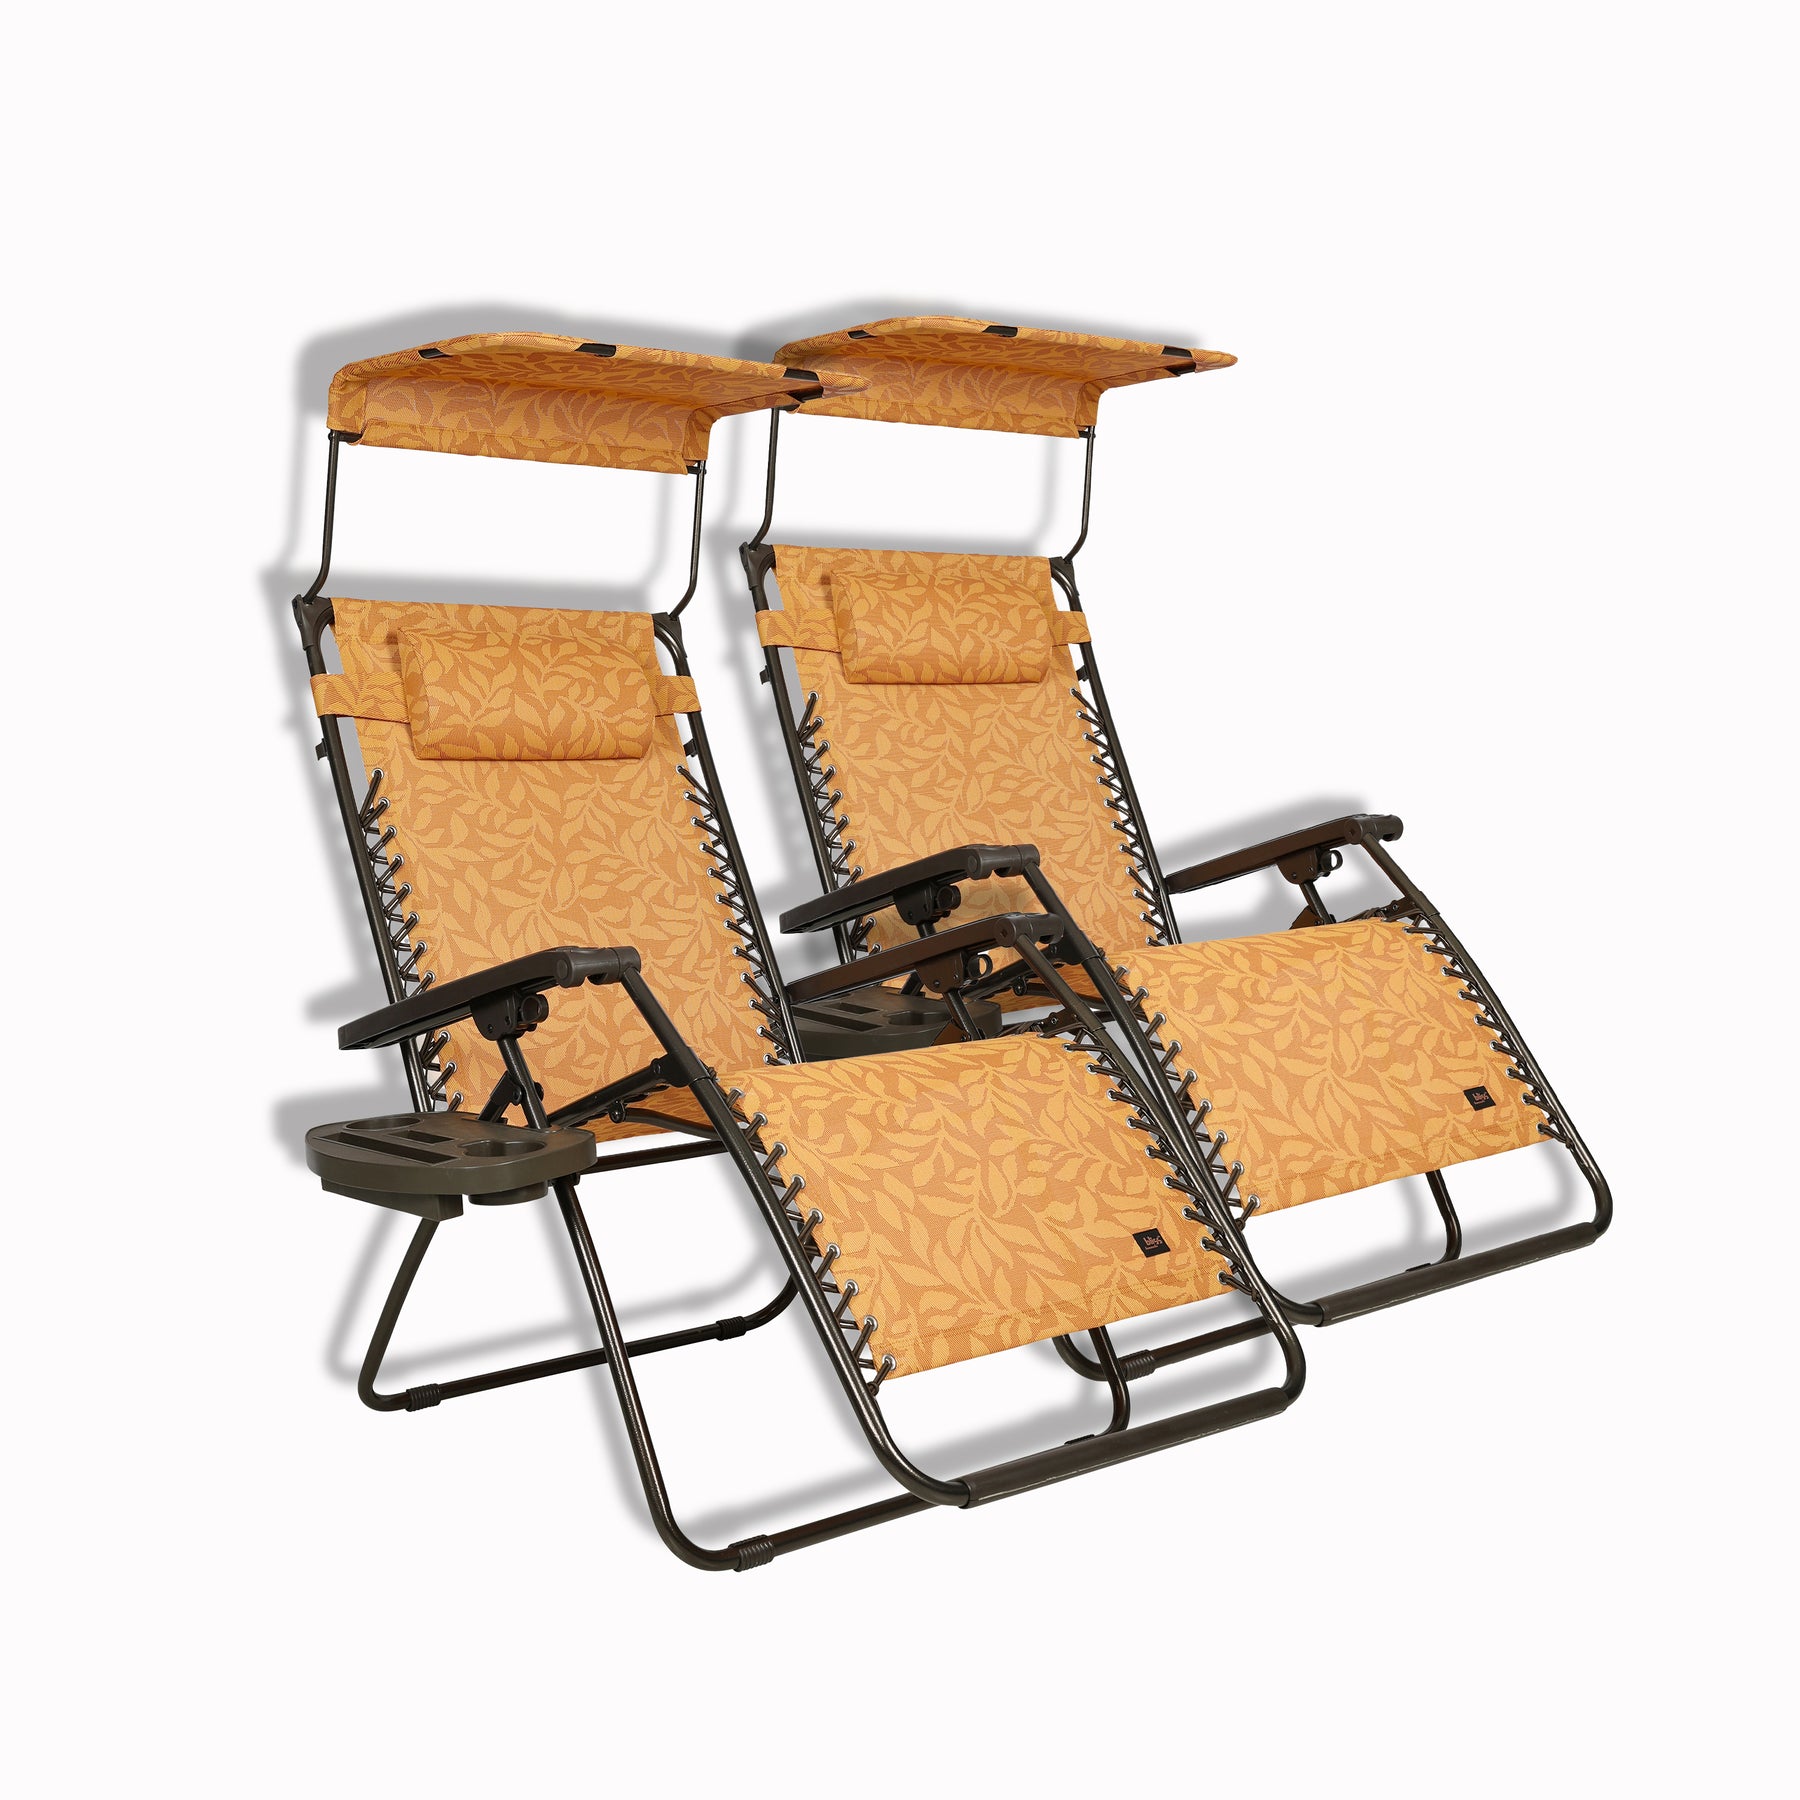 Set of 2 Bliss Hammocks 30-inch Wide XL Zero Gravity Chair with Adjustable Canopy Sun-Shade, Drink Tray, and Adjustable Pillow in the amber leaf variation.